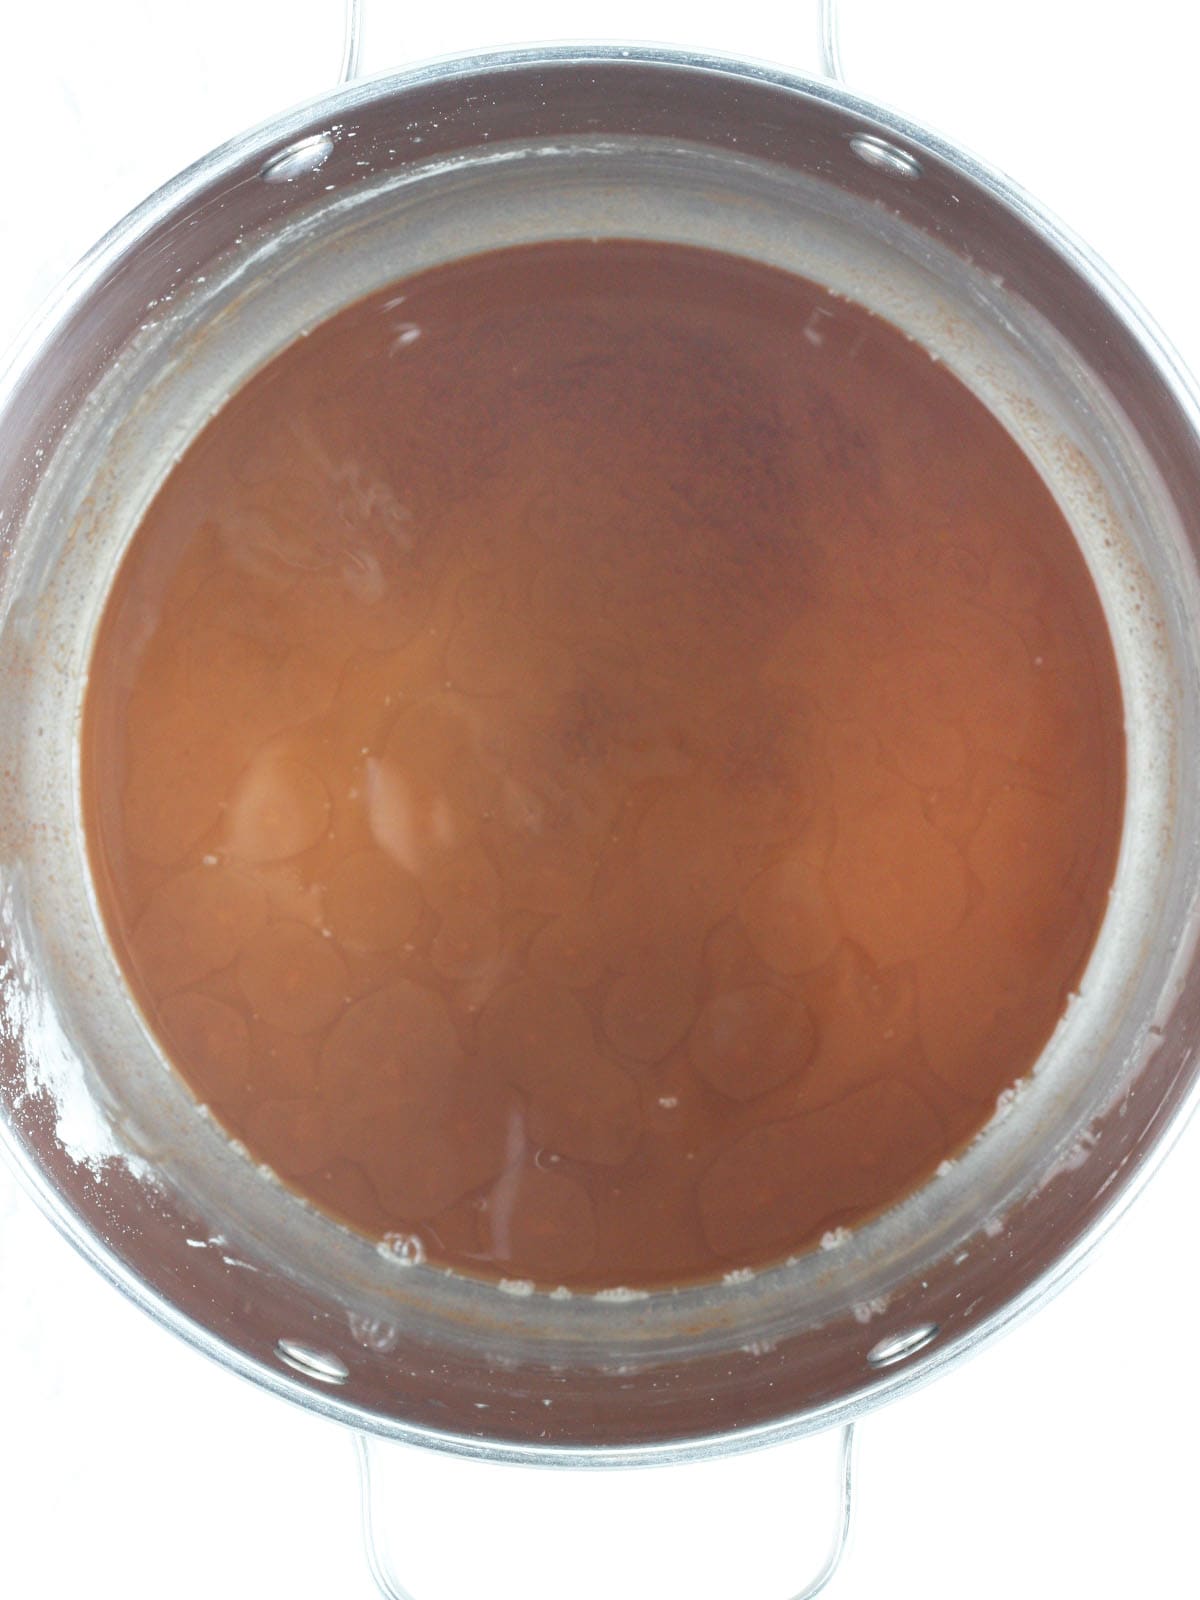 roux cooked until it is the color of peanut butter